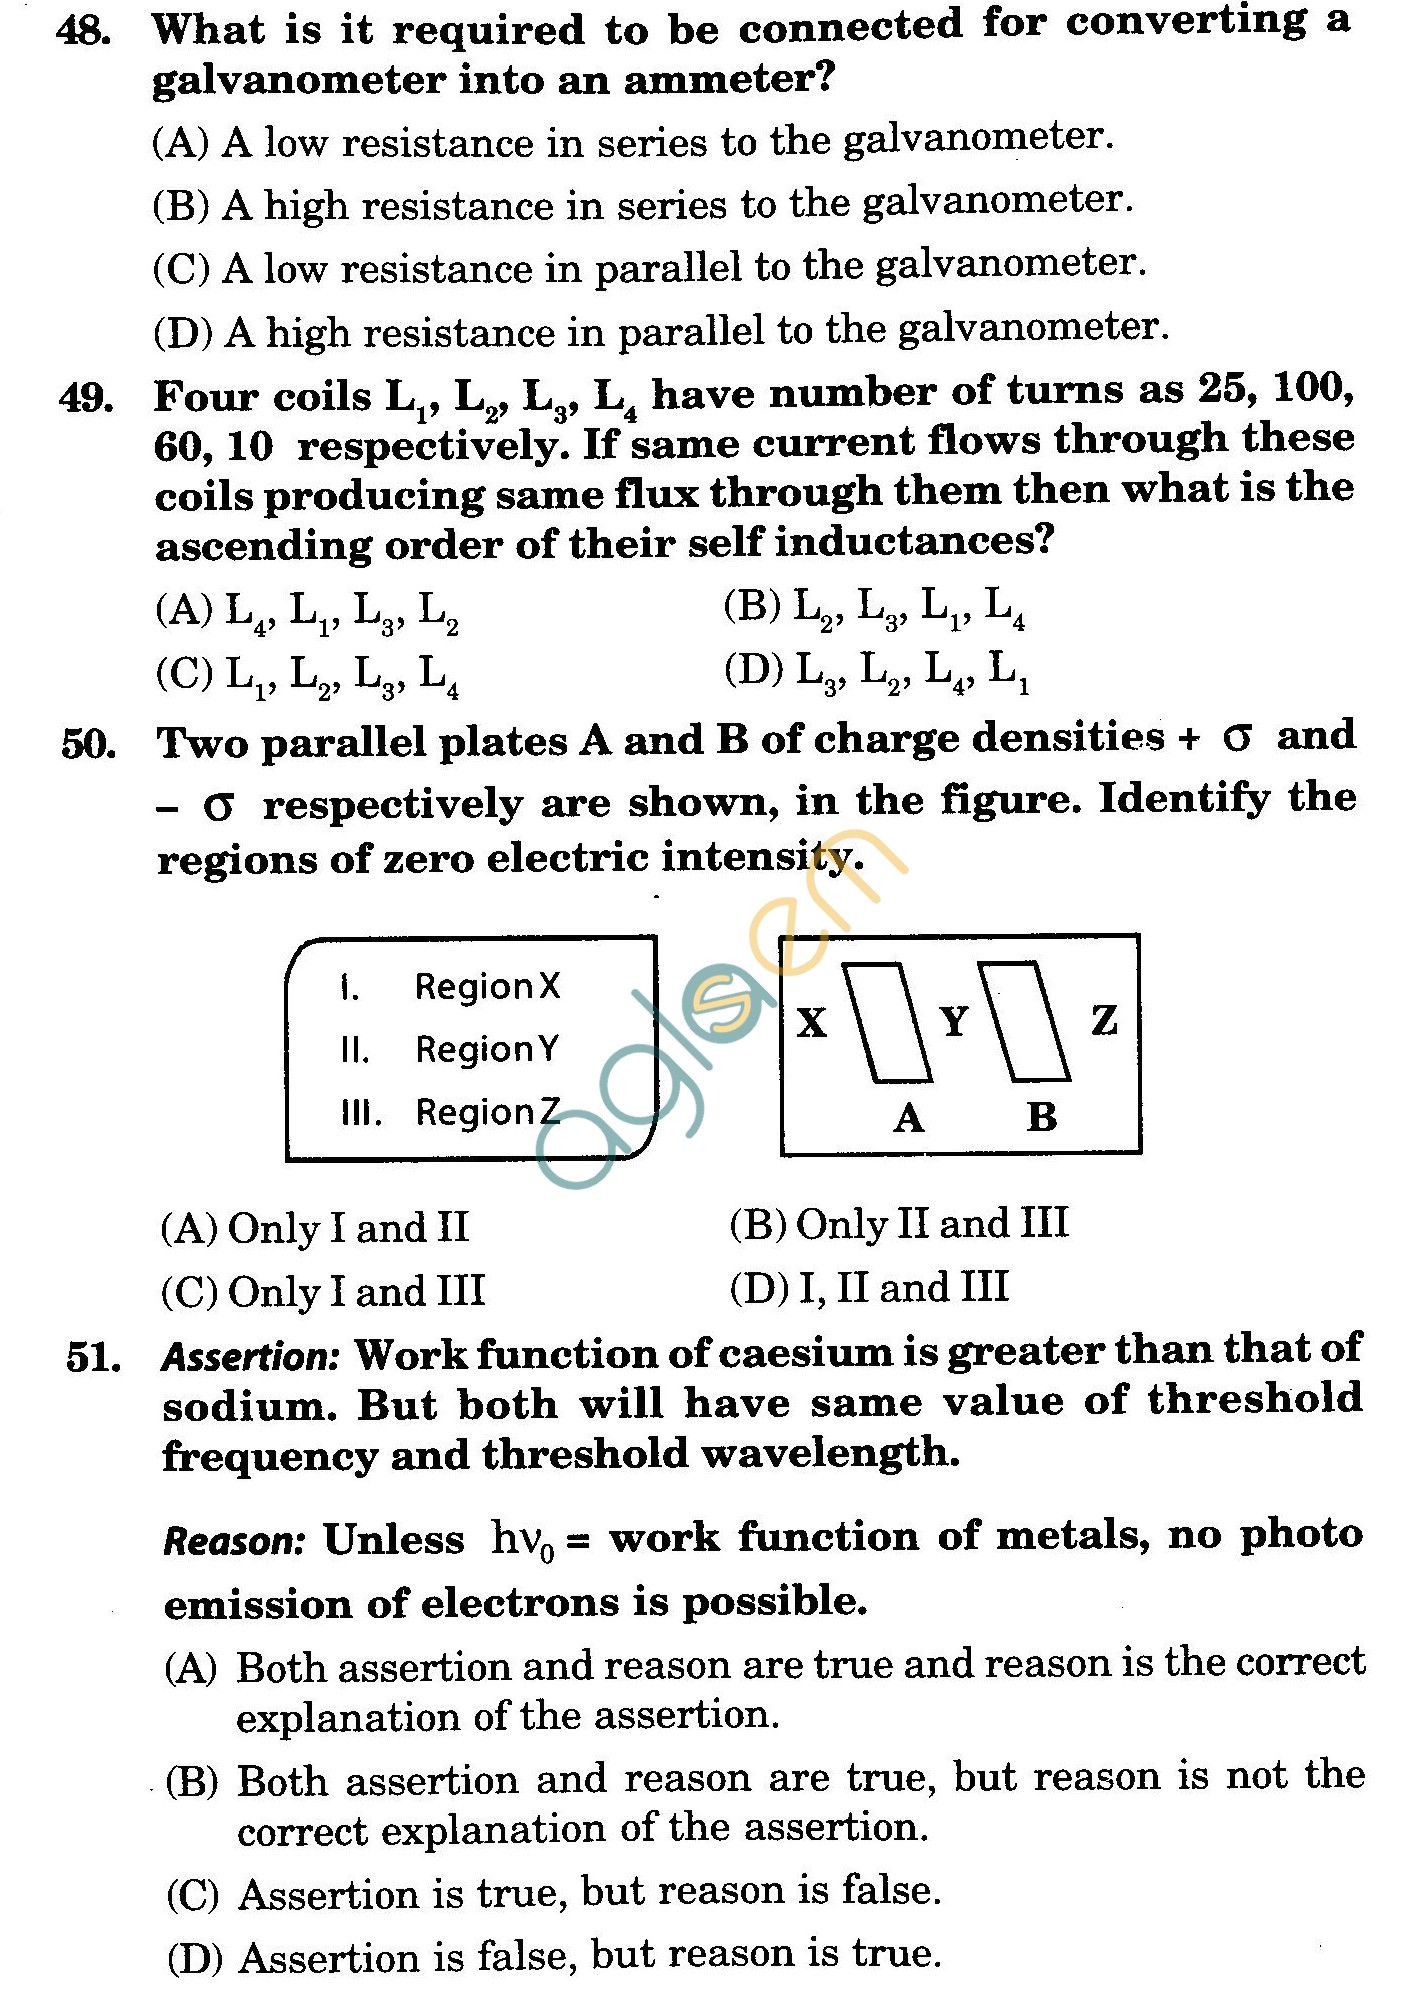 NSTSE 2010 Class XII PCB Question Paper with Answers - Physics